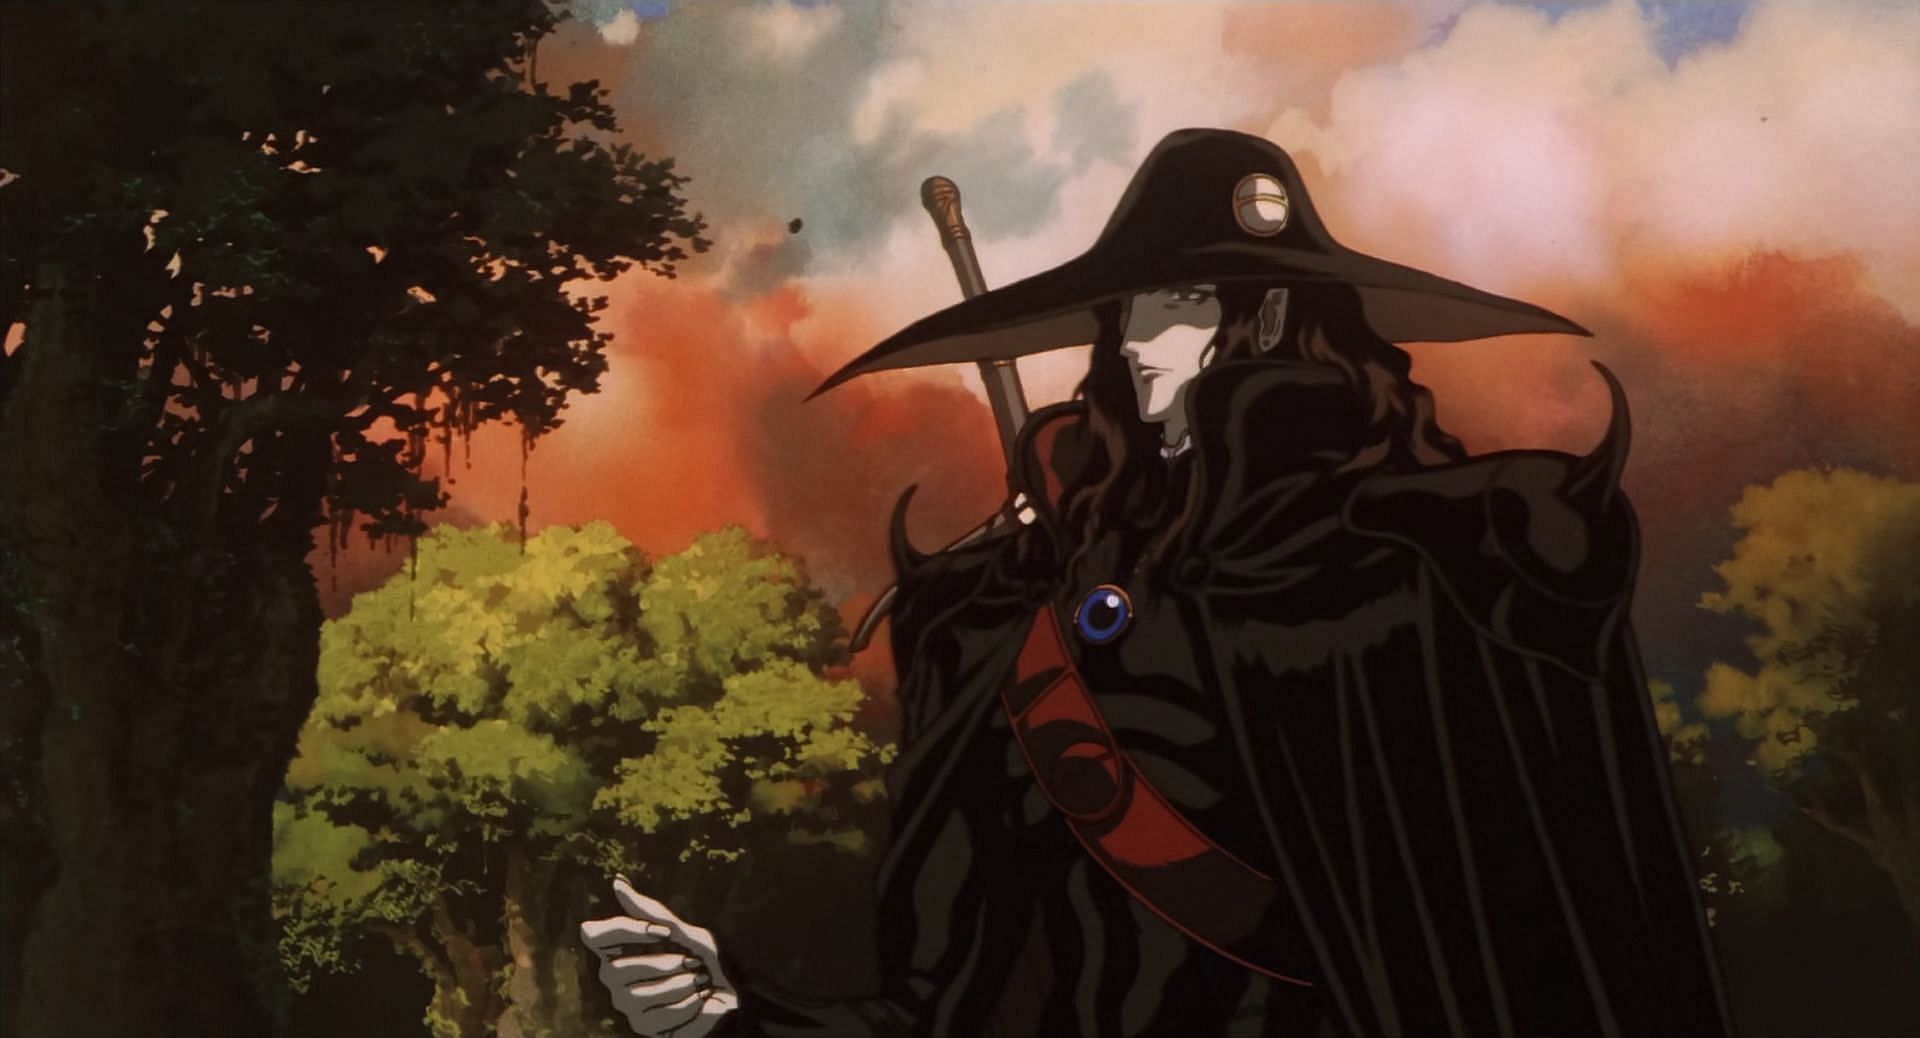 The Post-Apocalyptic World of Vampire Hunter D